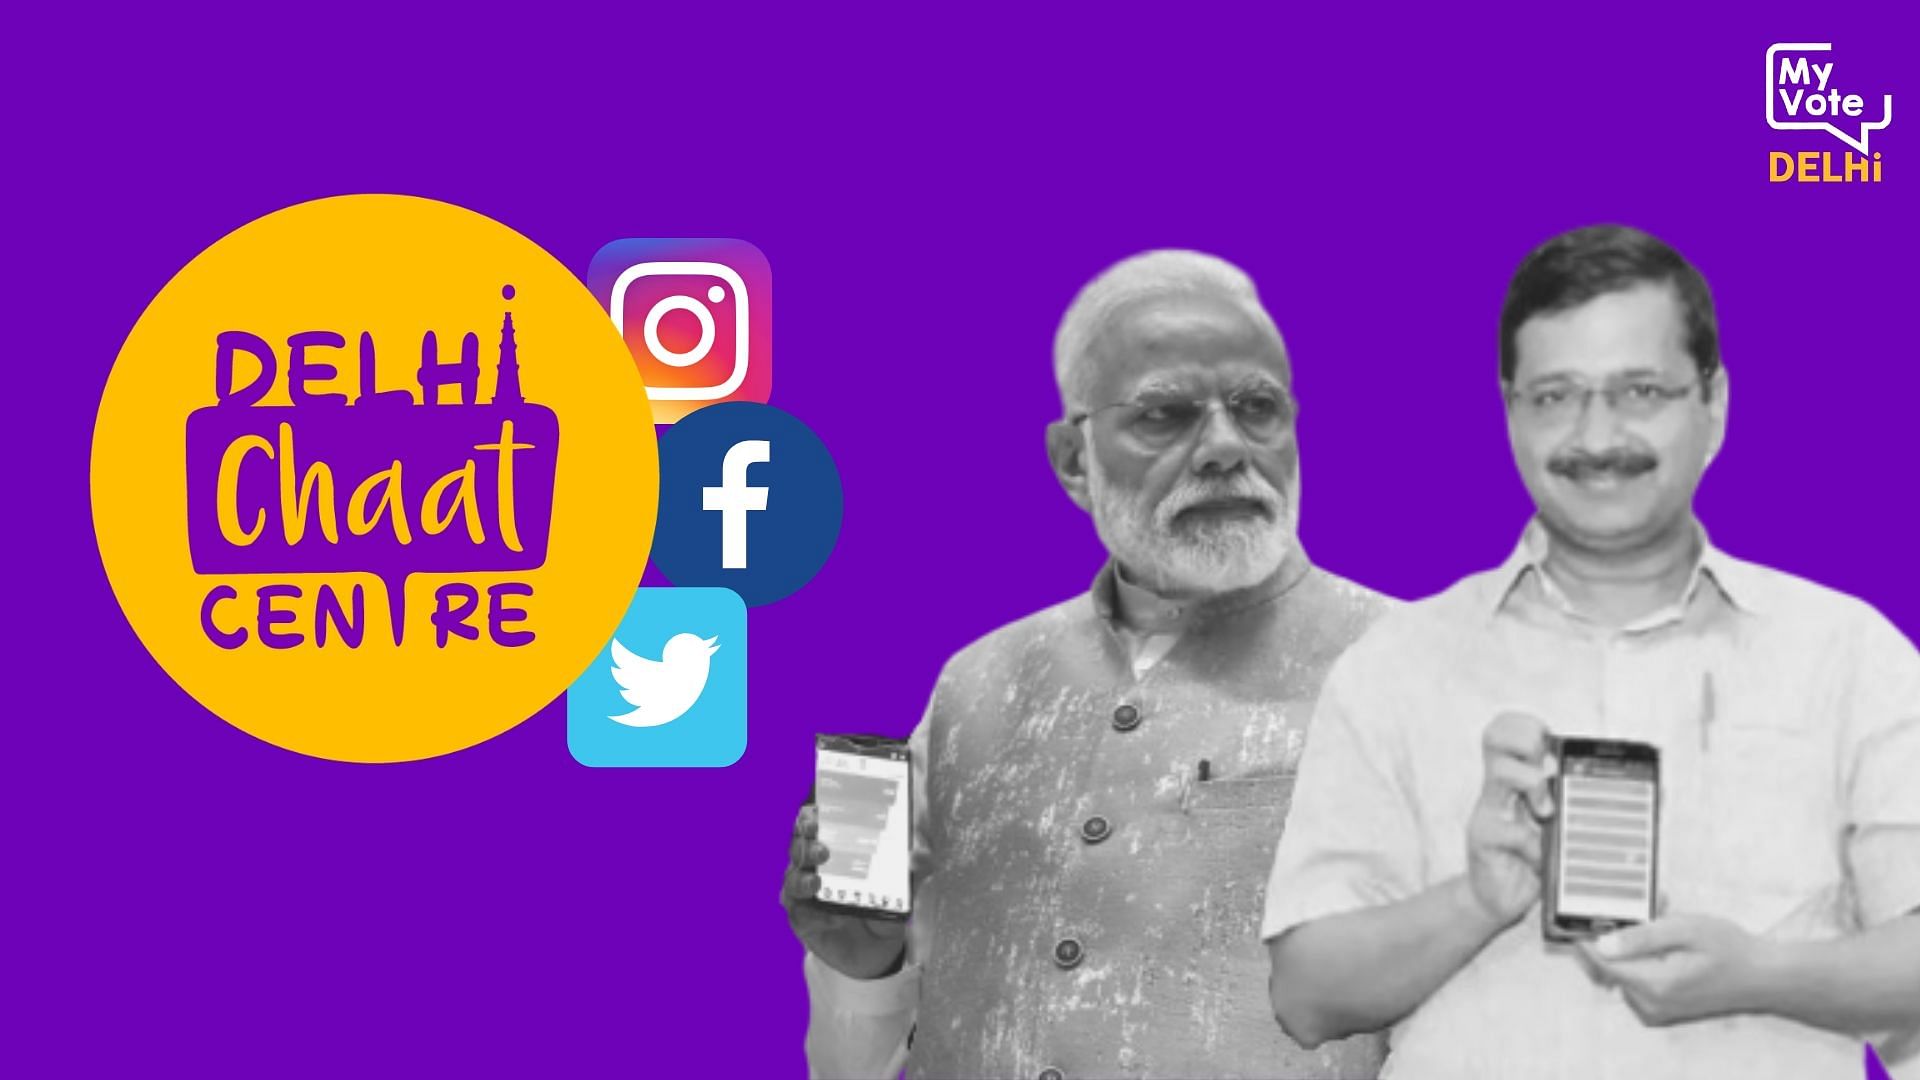 While BJP candidates are directly taking on the incumbent Aam Aadi Party (AAP) on ground; on social media, it is not the BJP but unofficial proxy pages of the party that are spending on advertisements and sustaining campaigns of the party. 